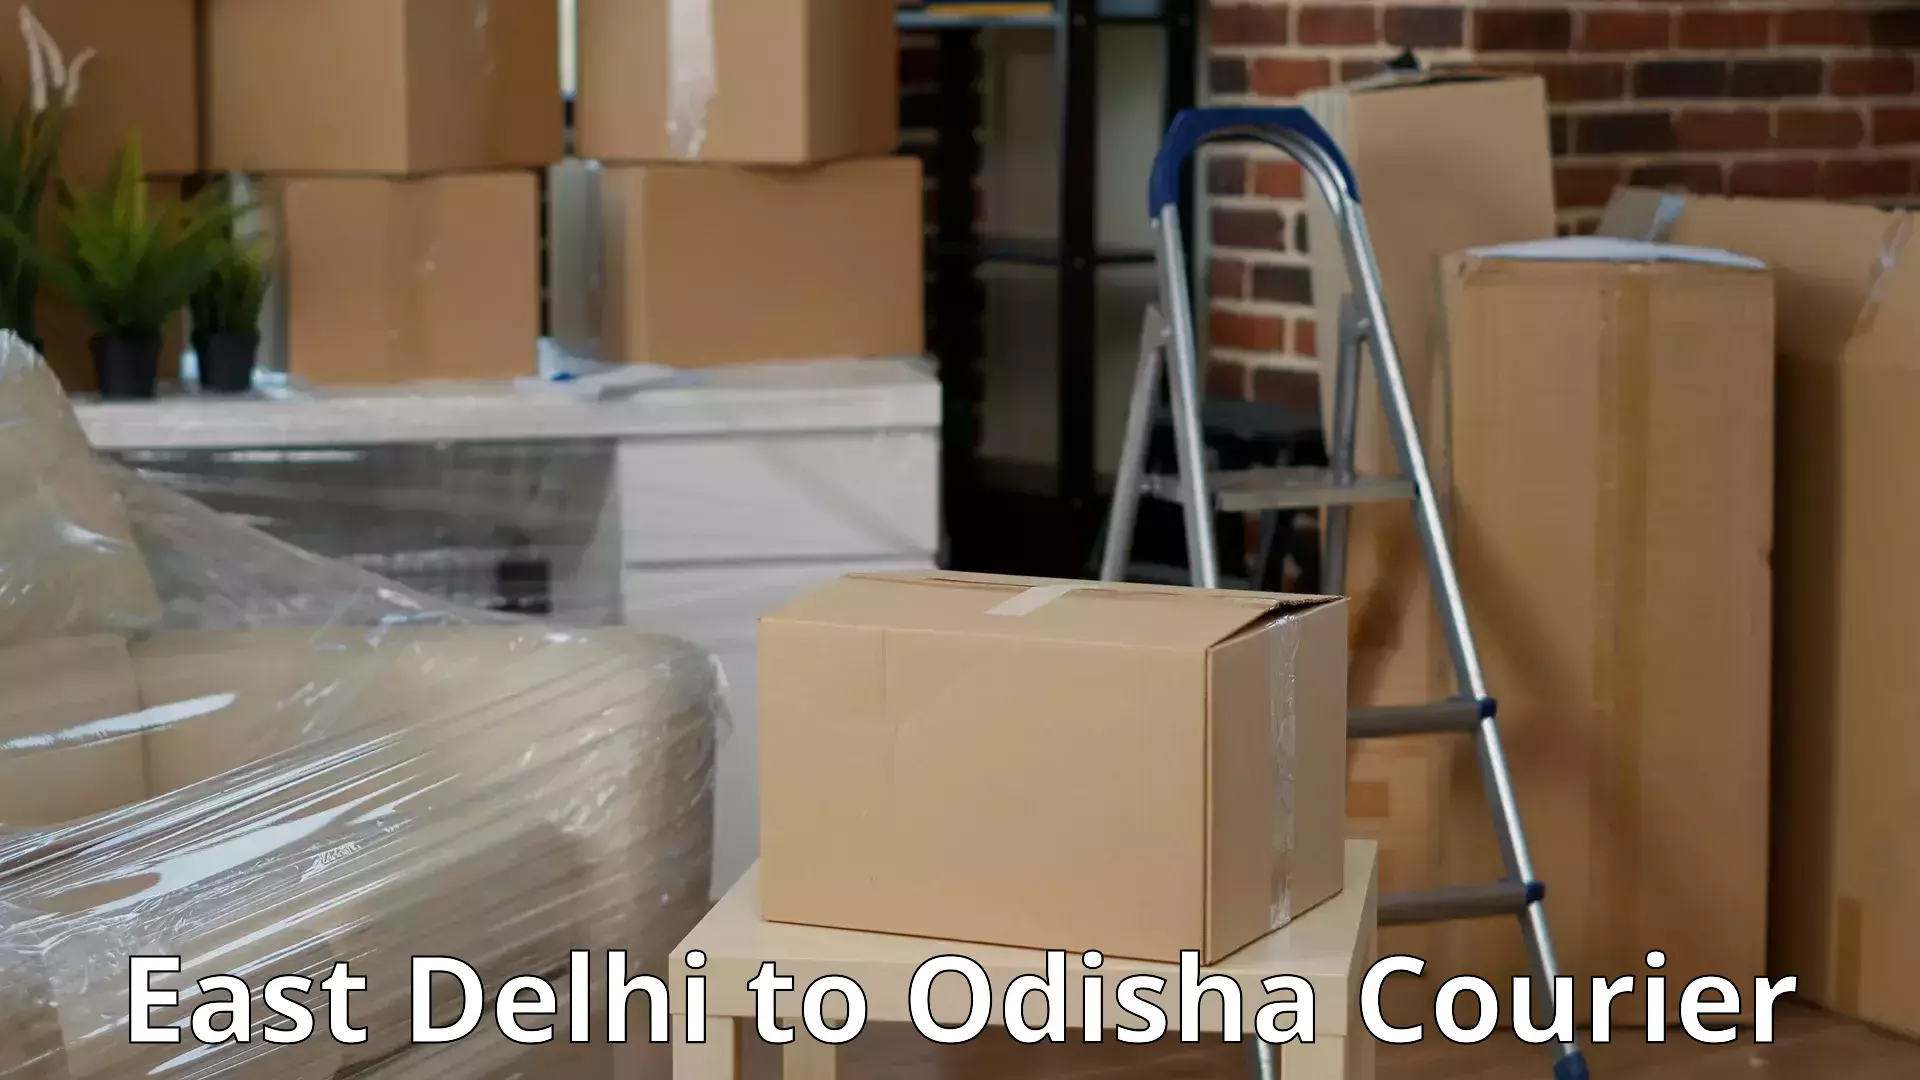 Packing and moving services East Delhi to Nabarangpur